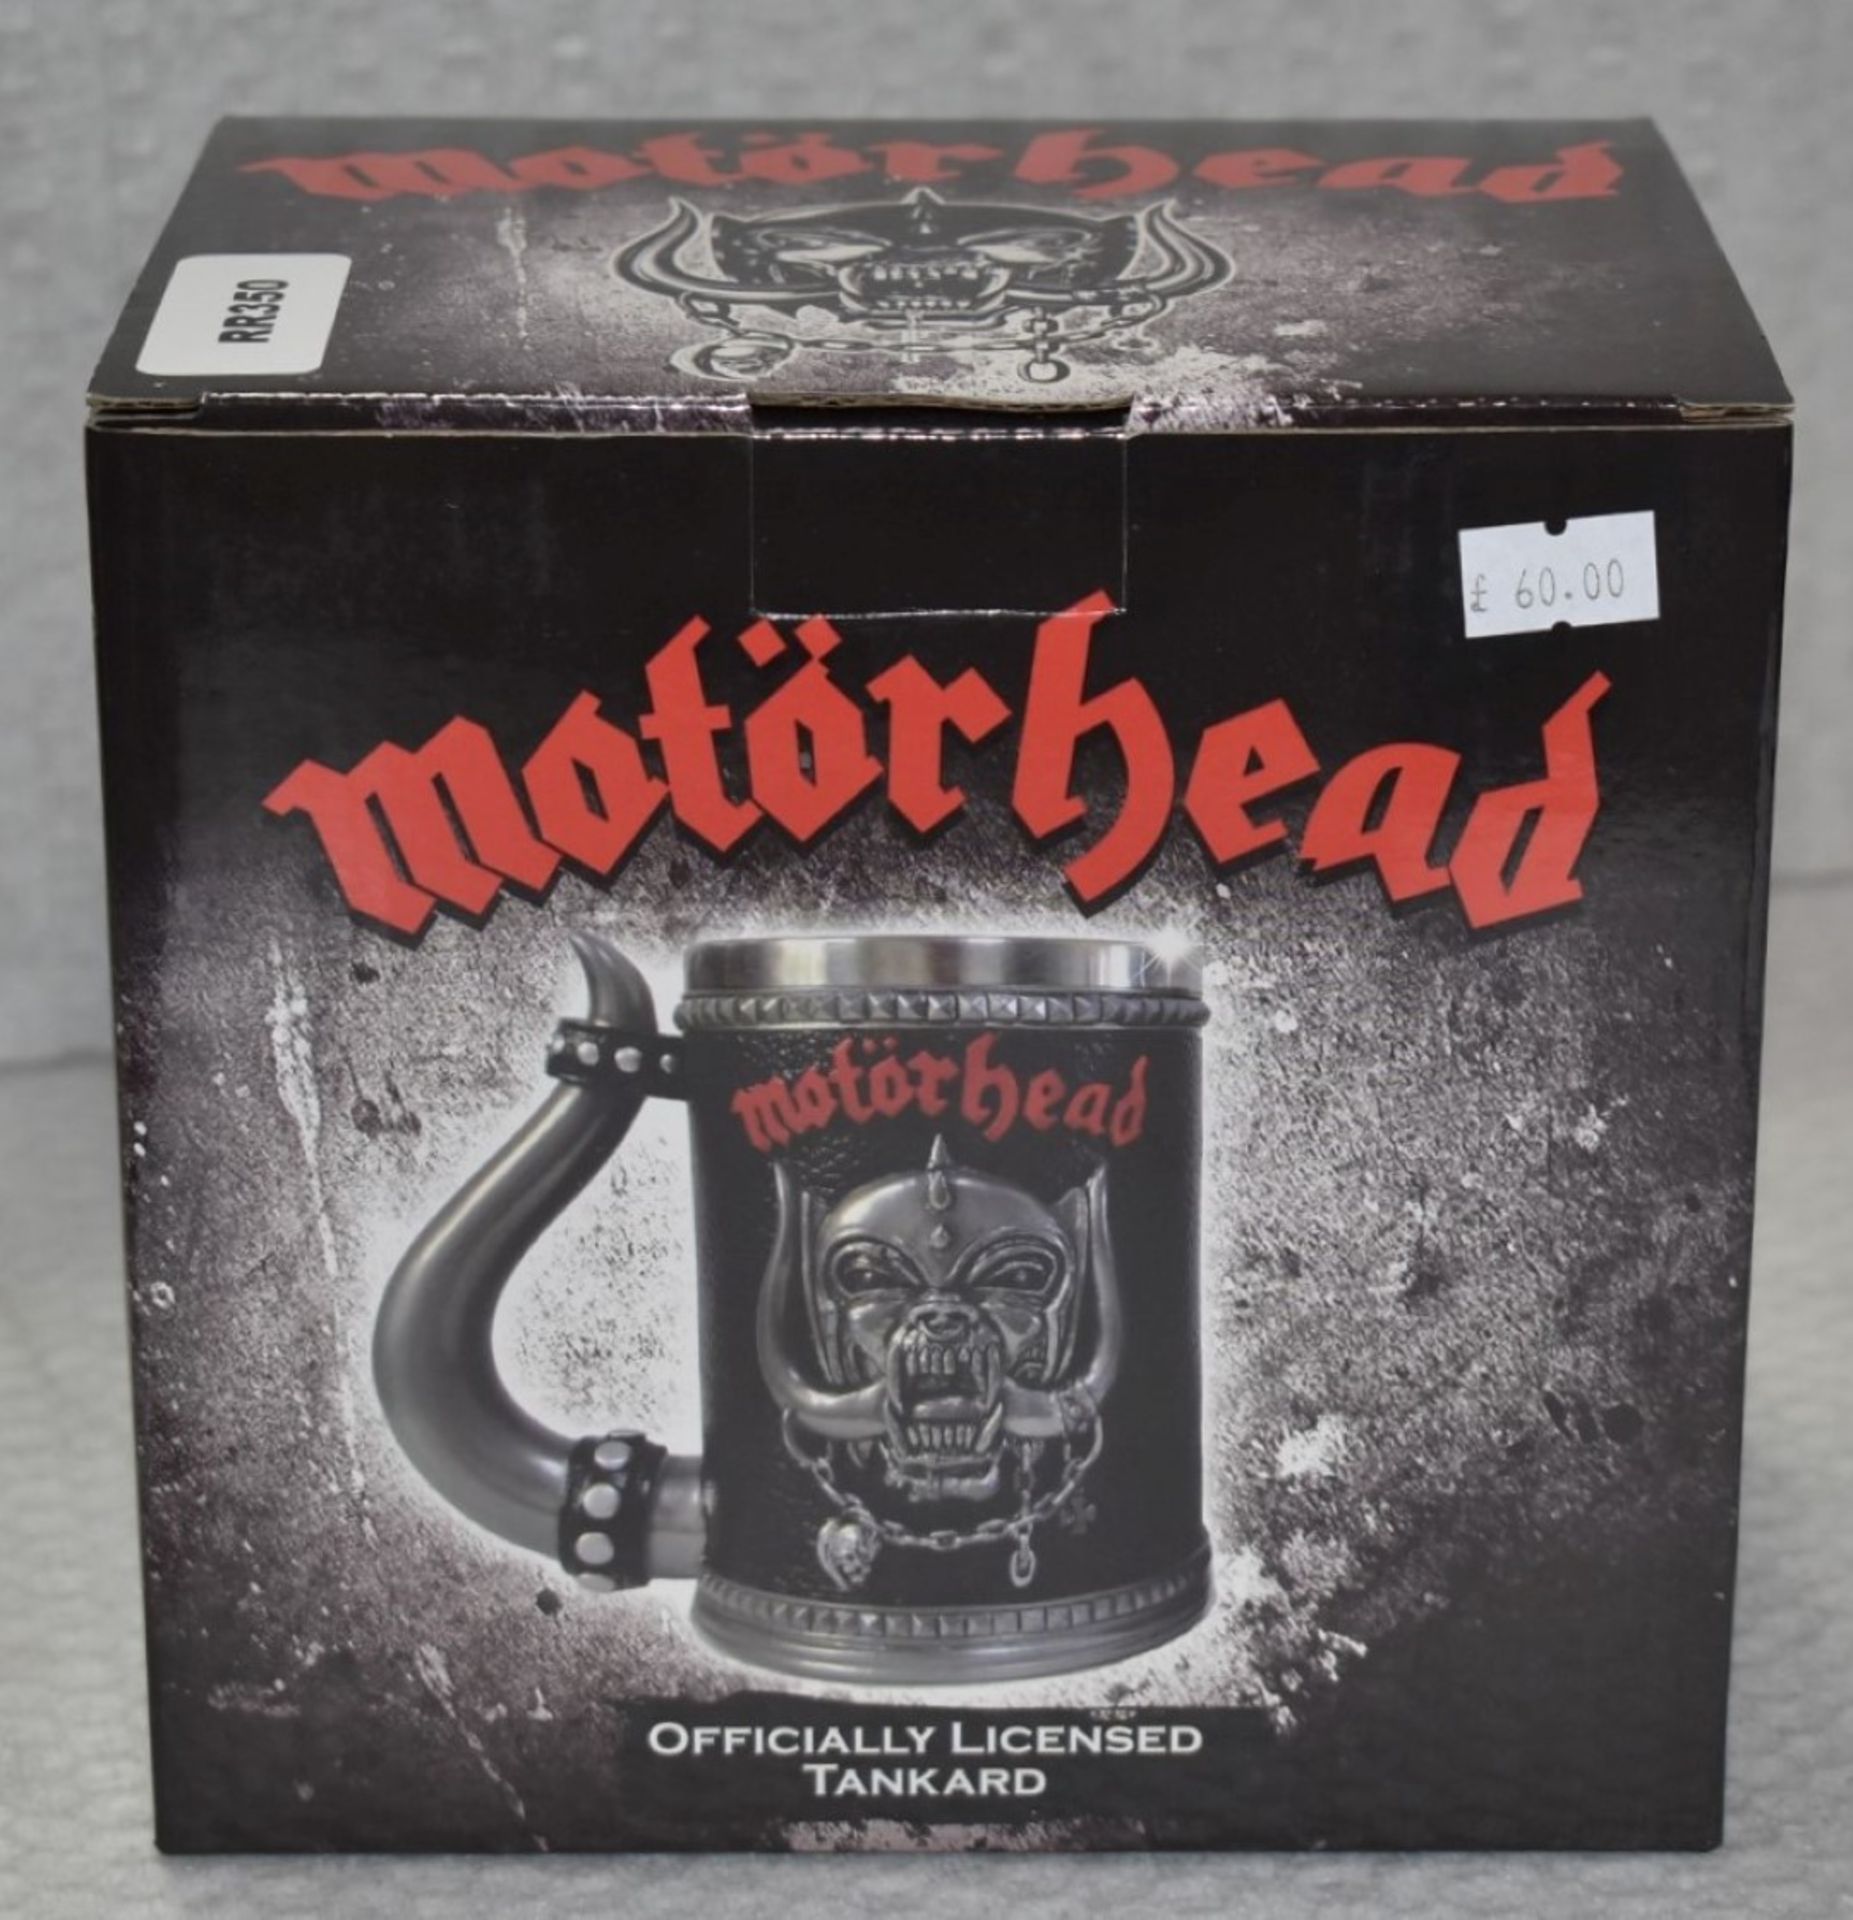 1 x Motorhead Drinks Tanker By Nemesis Now - Features Detailed Warpig Sculpture, Hand Painted - Image 3 of 11